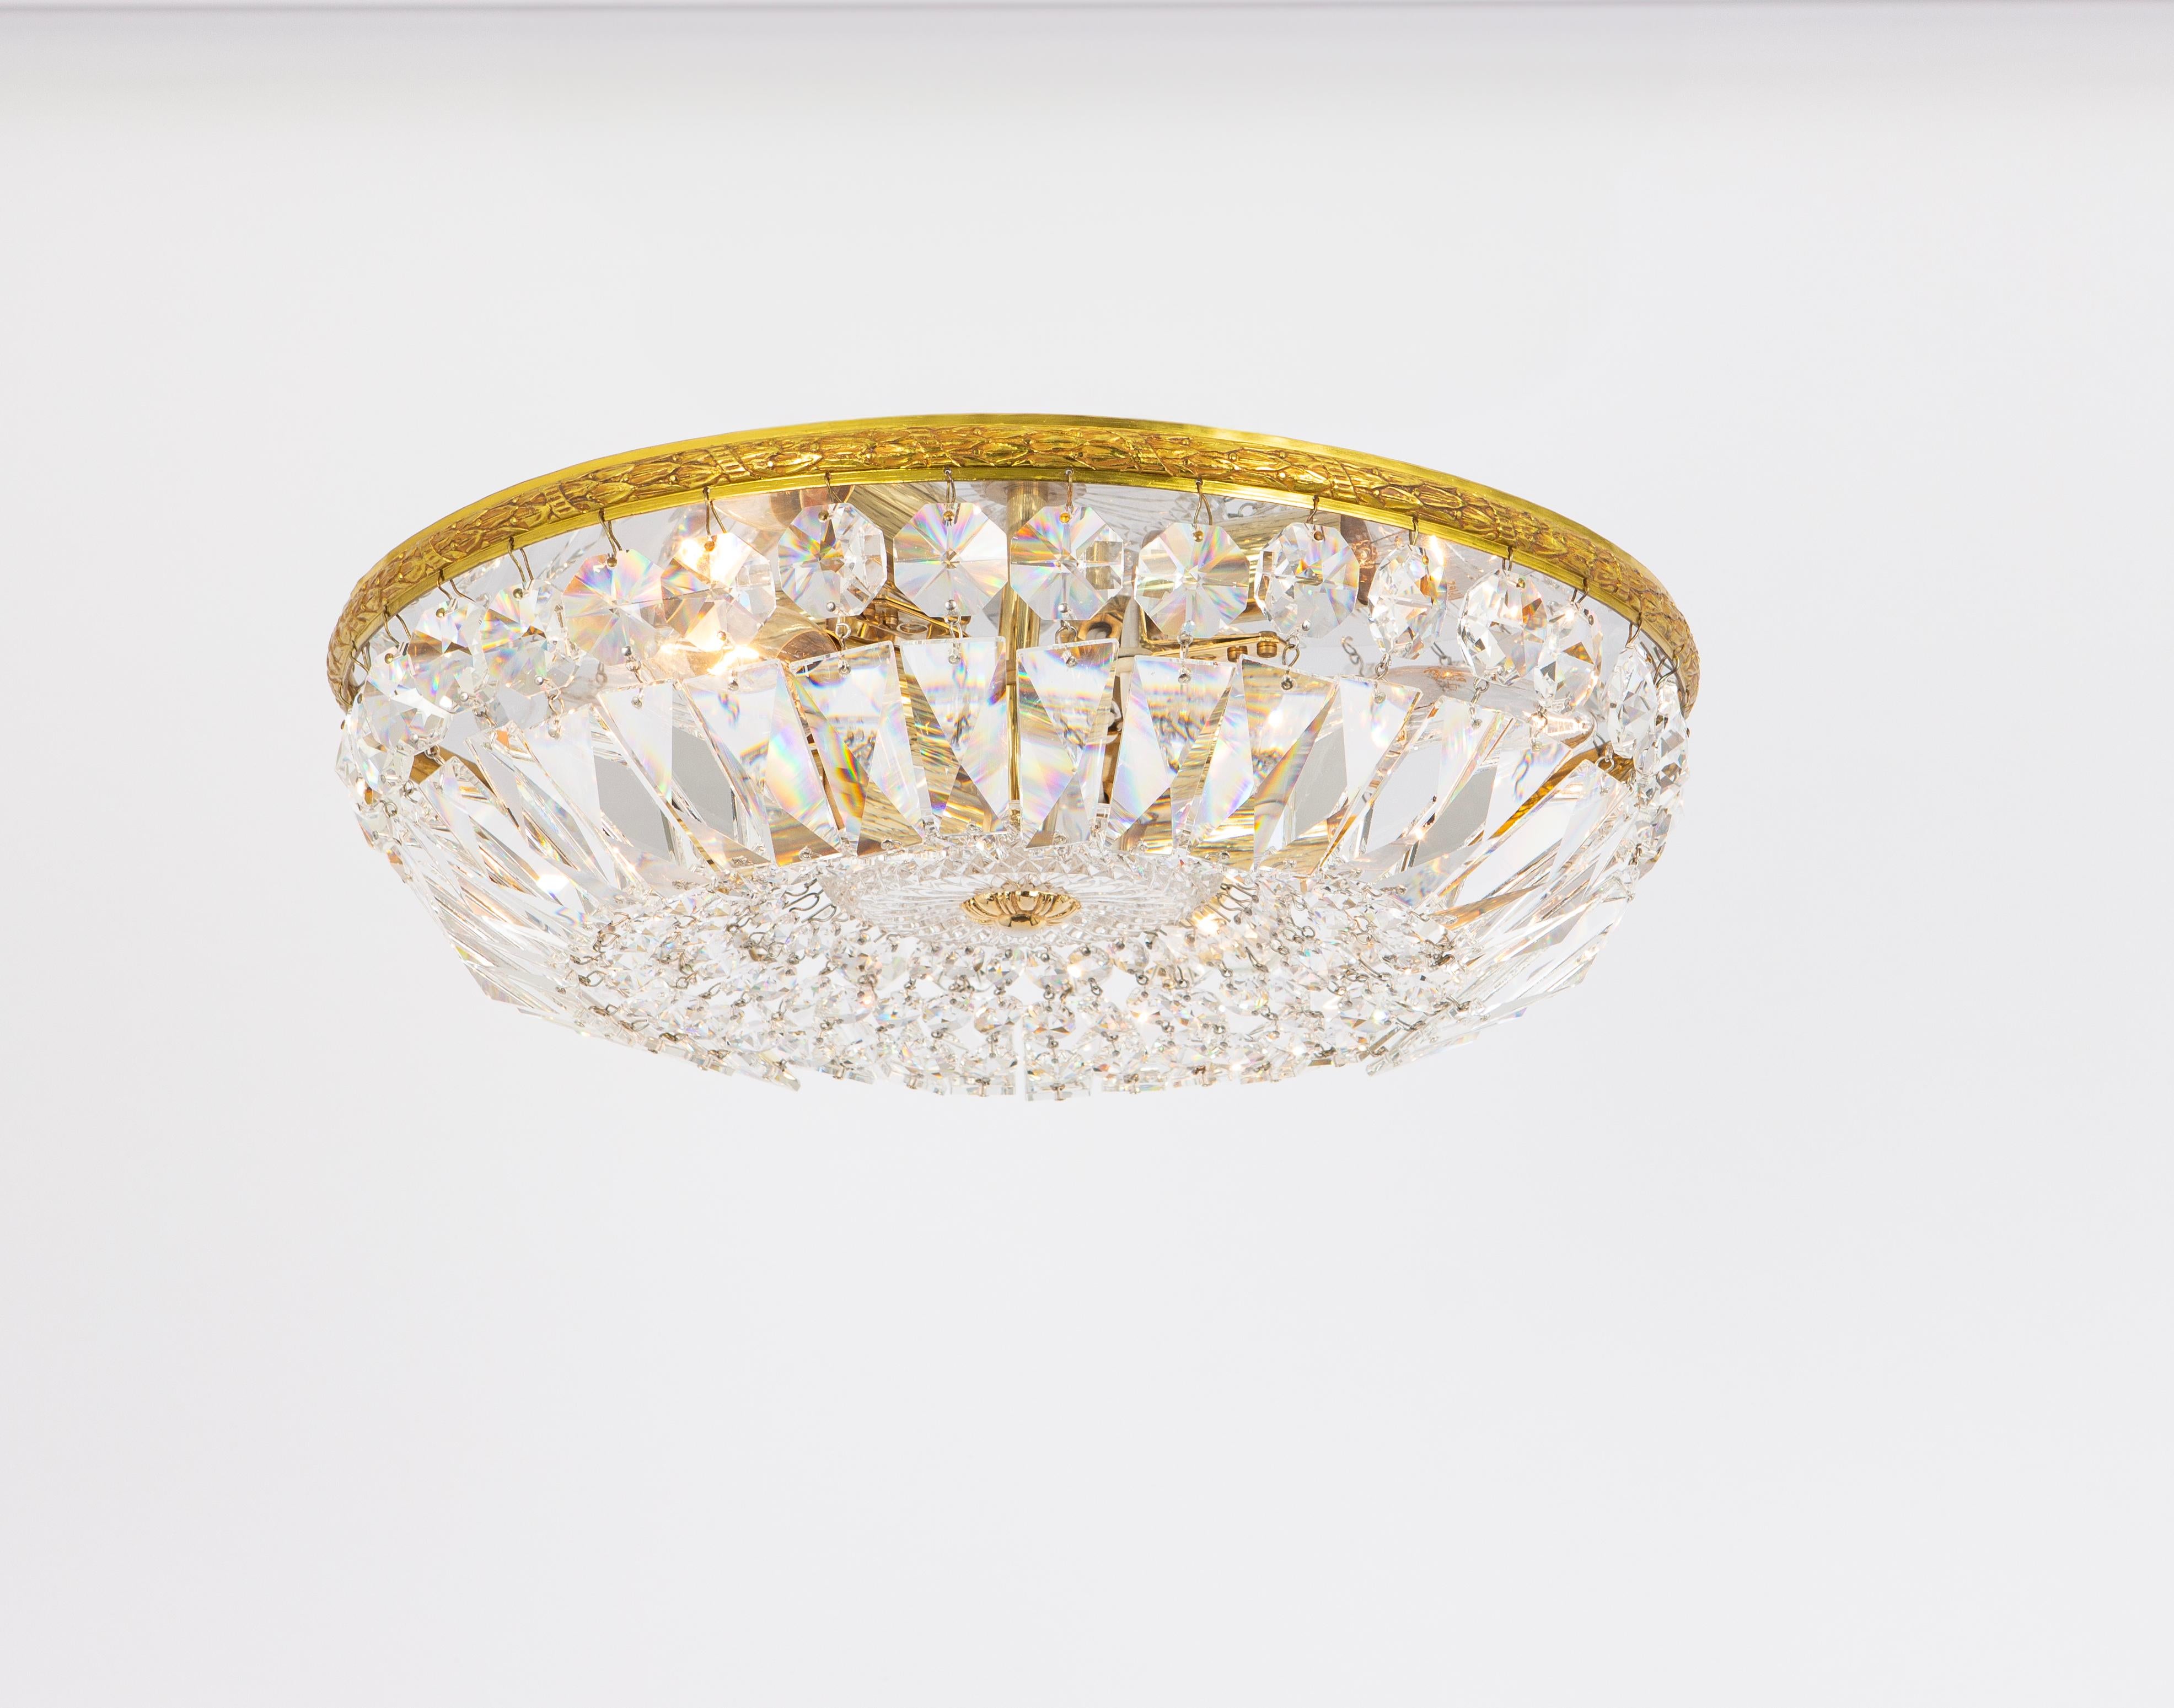 Petite Delicate floral Flush mount with crystal glass and gilded brass parts made by Palwa, Germany, 1970s. Featuring a multitude of crystal glasses.
It is an exquisite lighting fixture that combines elegance, functionality, and a touch of luxury to